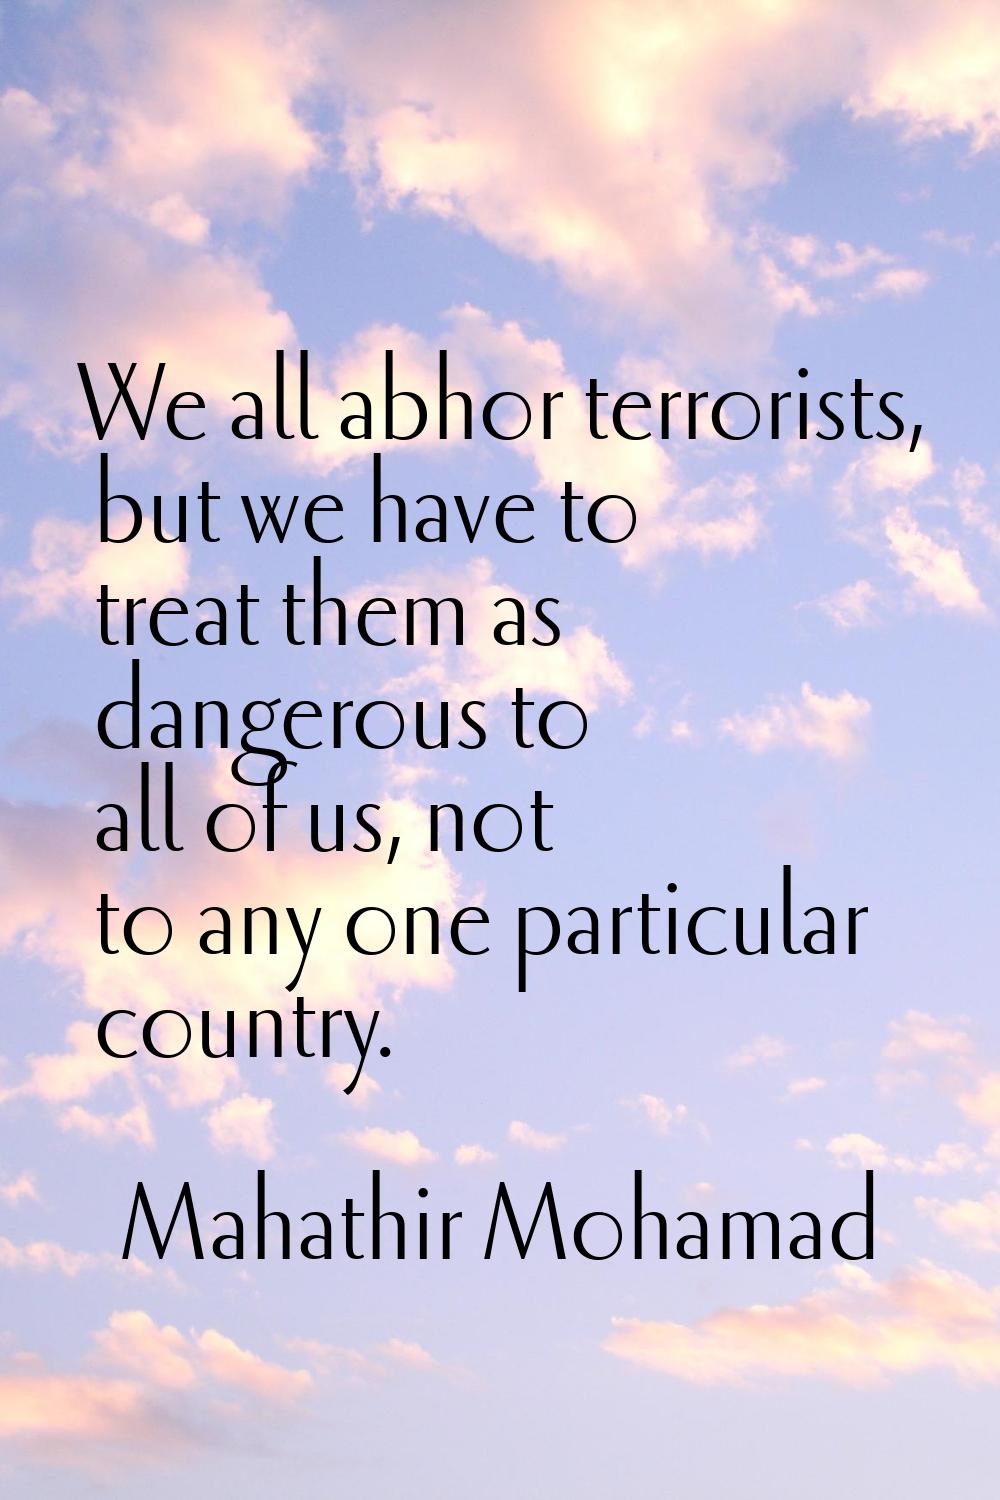 We all abhor terrorists, but we have to treat them as dangerous to all of us, not to any one partic